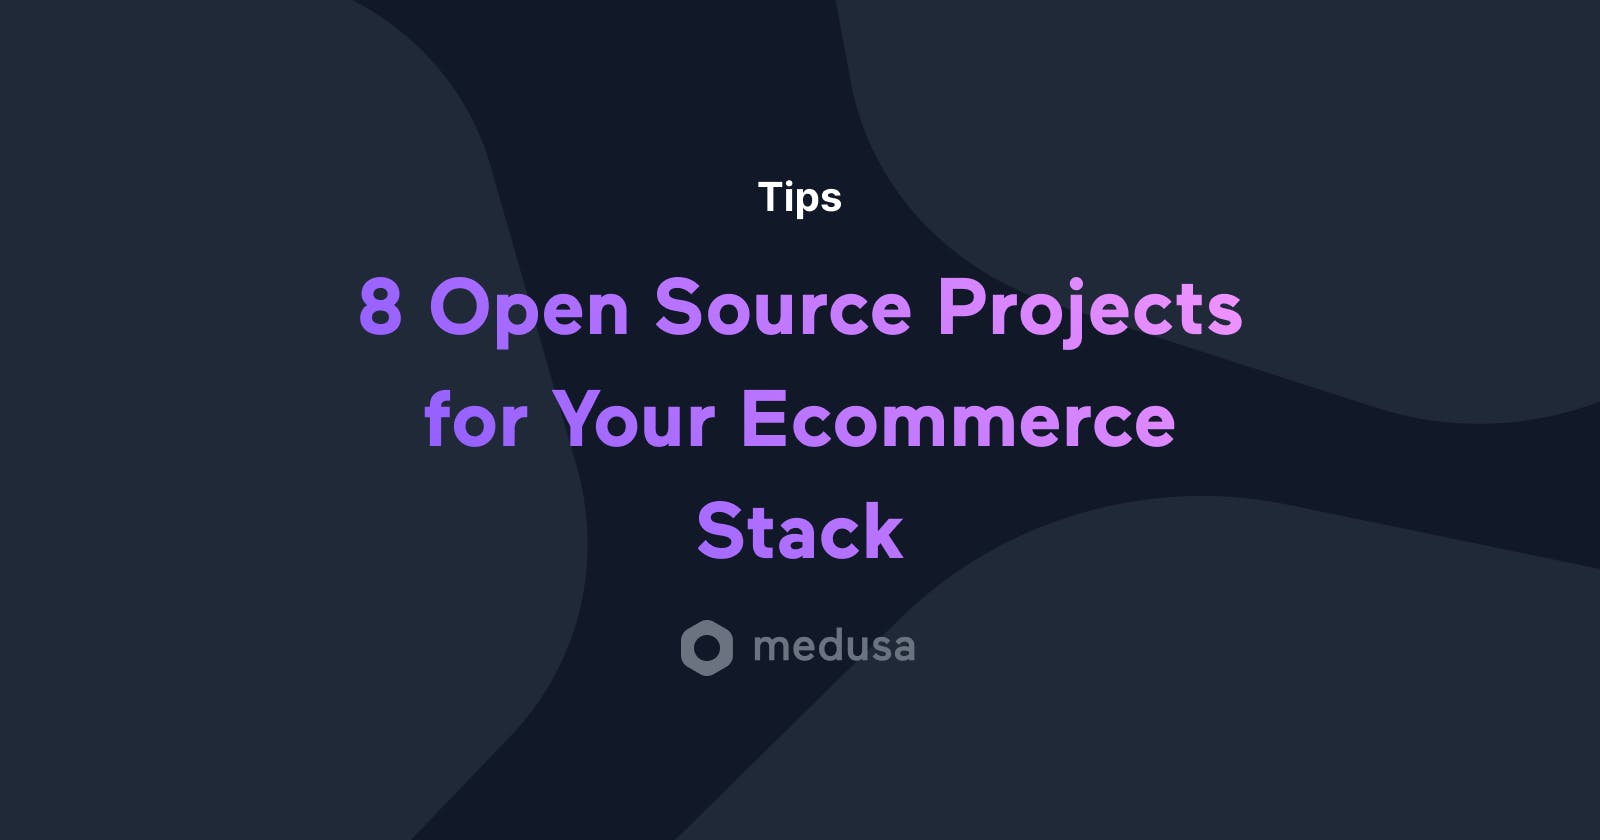 8 Open Source Tools for Your Ecommerce Stack